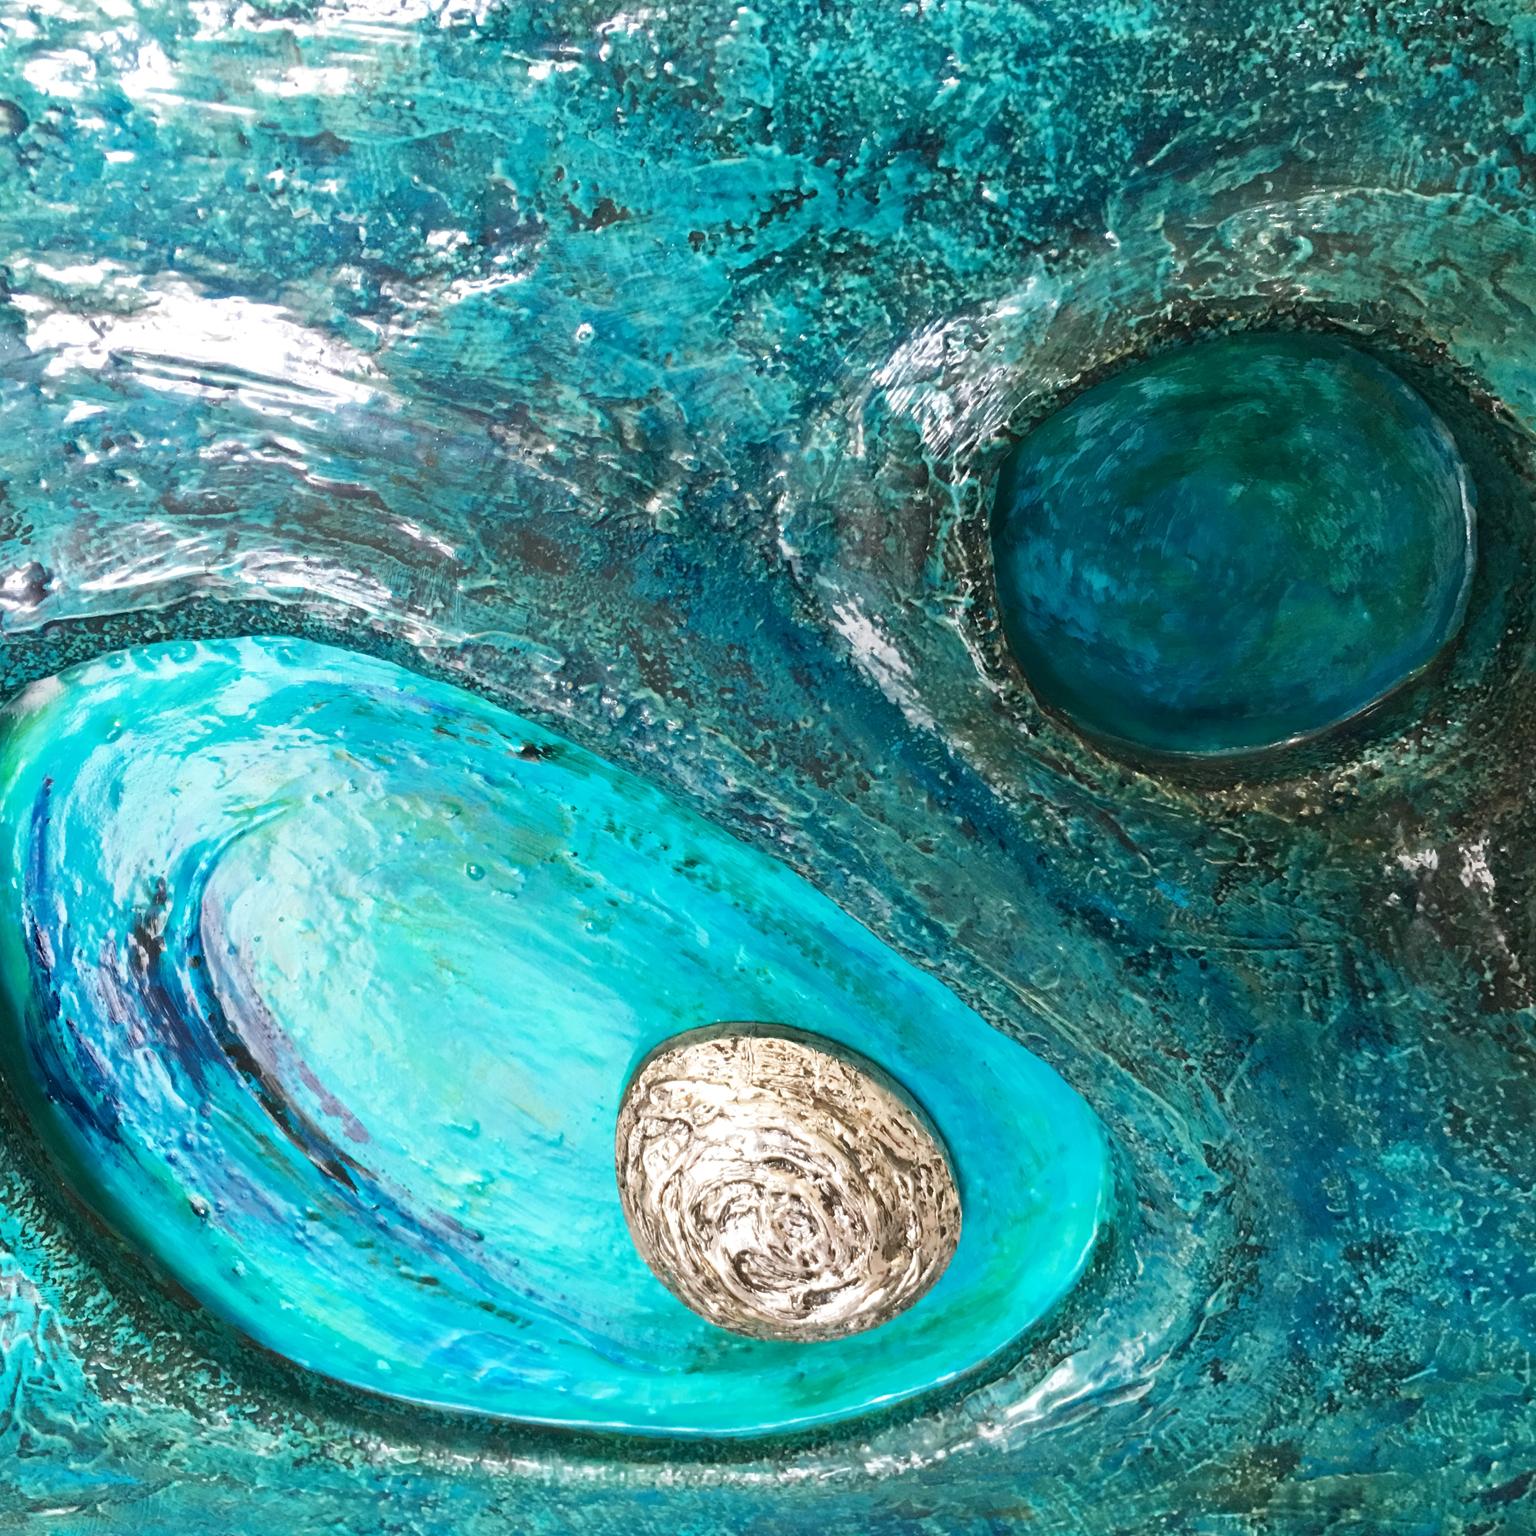 Psychedelic Turquoise Acrylic Resin Art Wall Sculpture Panel by Lorraine Stelzer For Sale 10